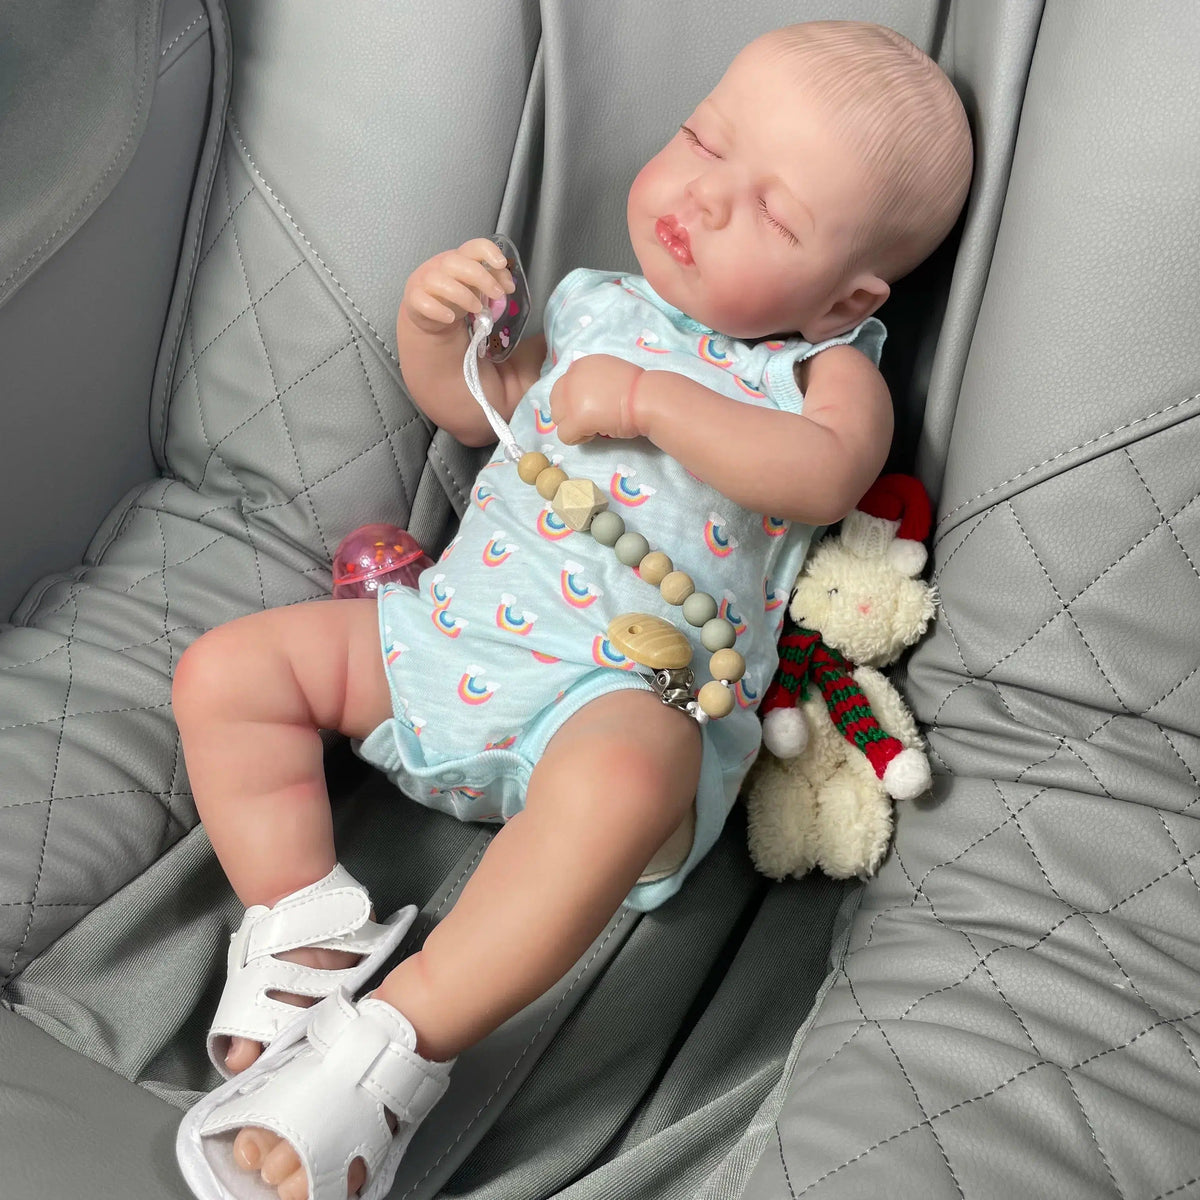 New 50CM Reborn Baby Dolls LouLou Lifelike Silicone Vinyl Newborn 3D Skin Visible Veins DIY Toys Christmas Gift For Girls-Maternity Miracles - Mom & Baby Gifts